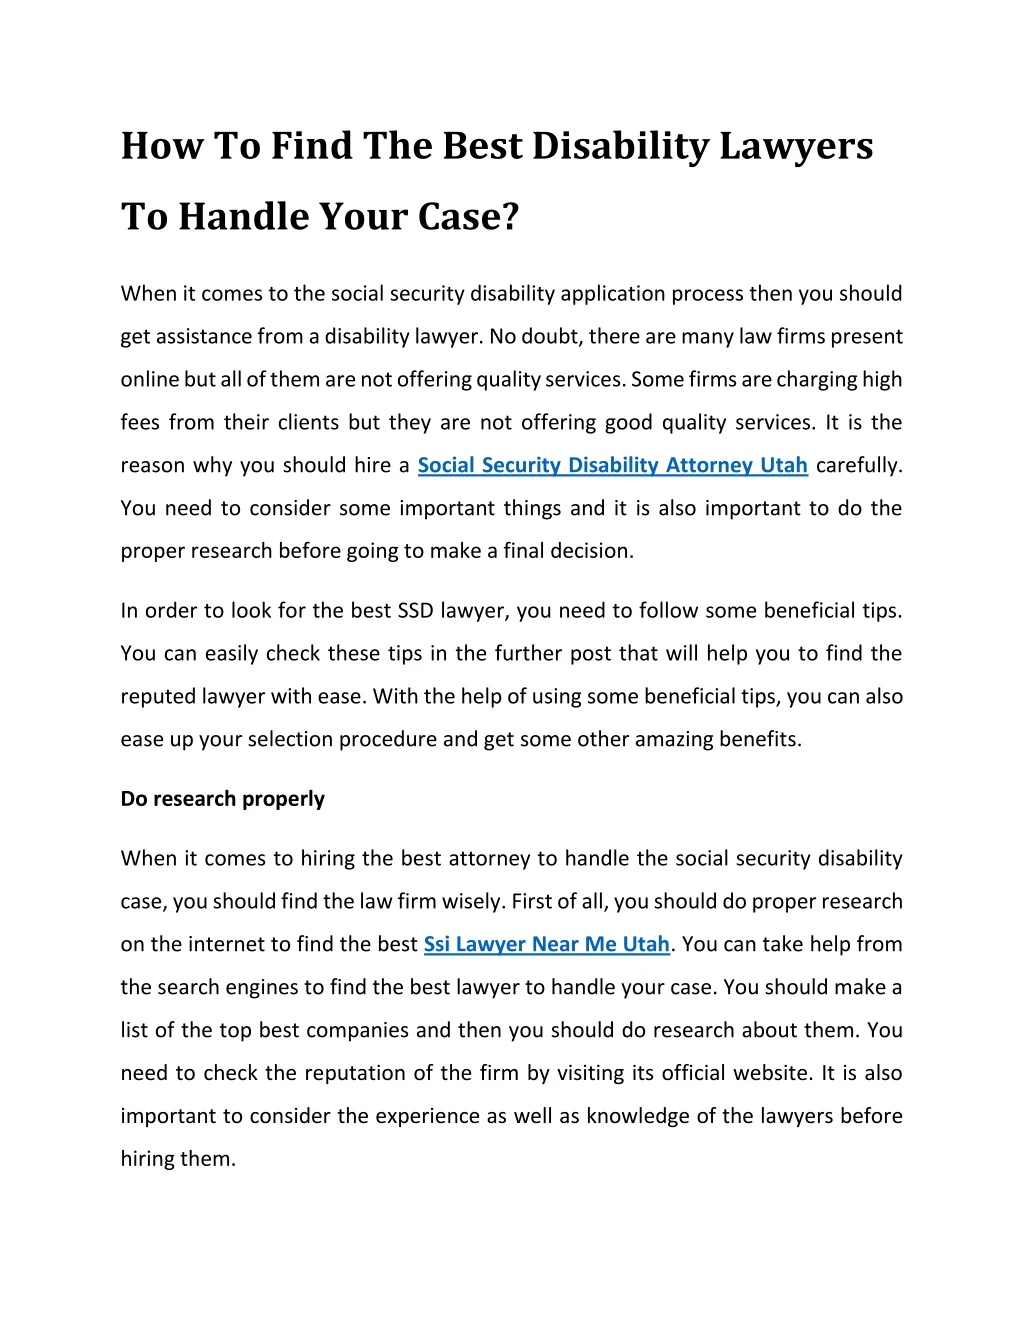 how to find the best disability lawyers